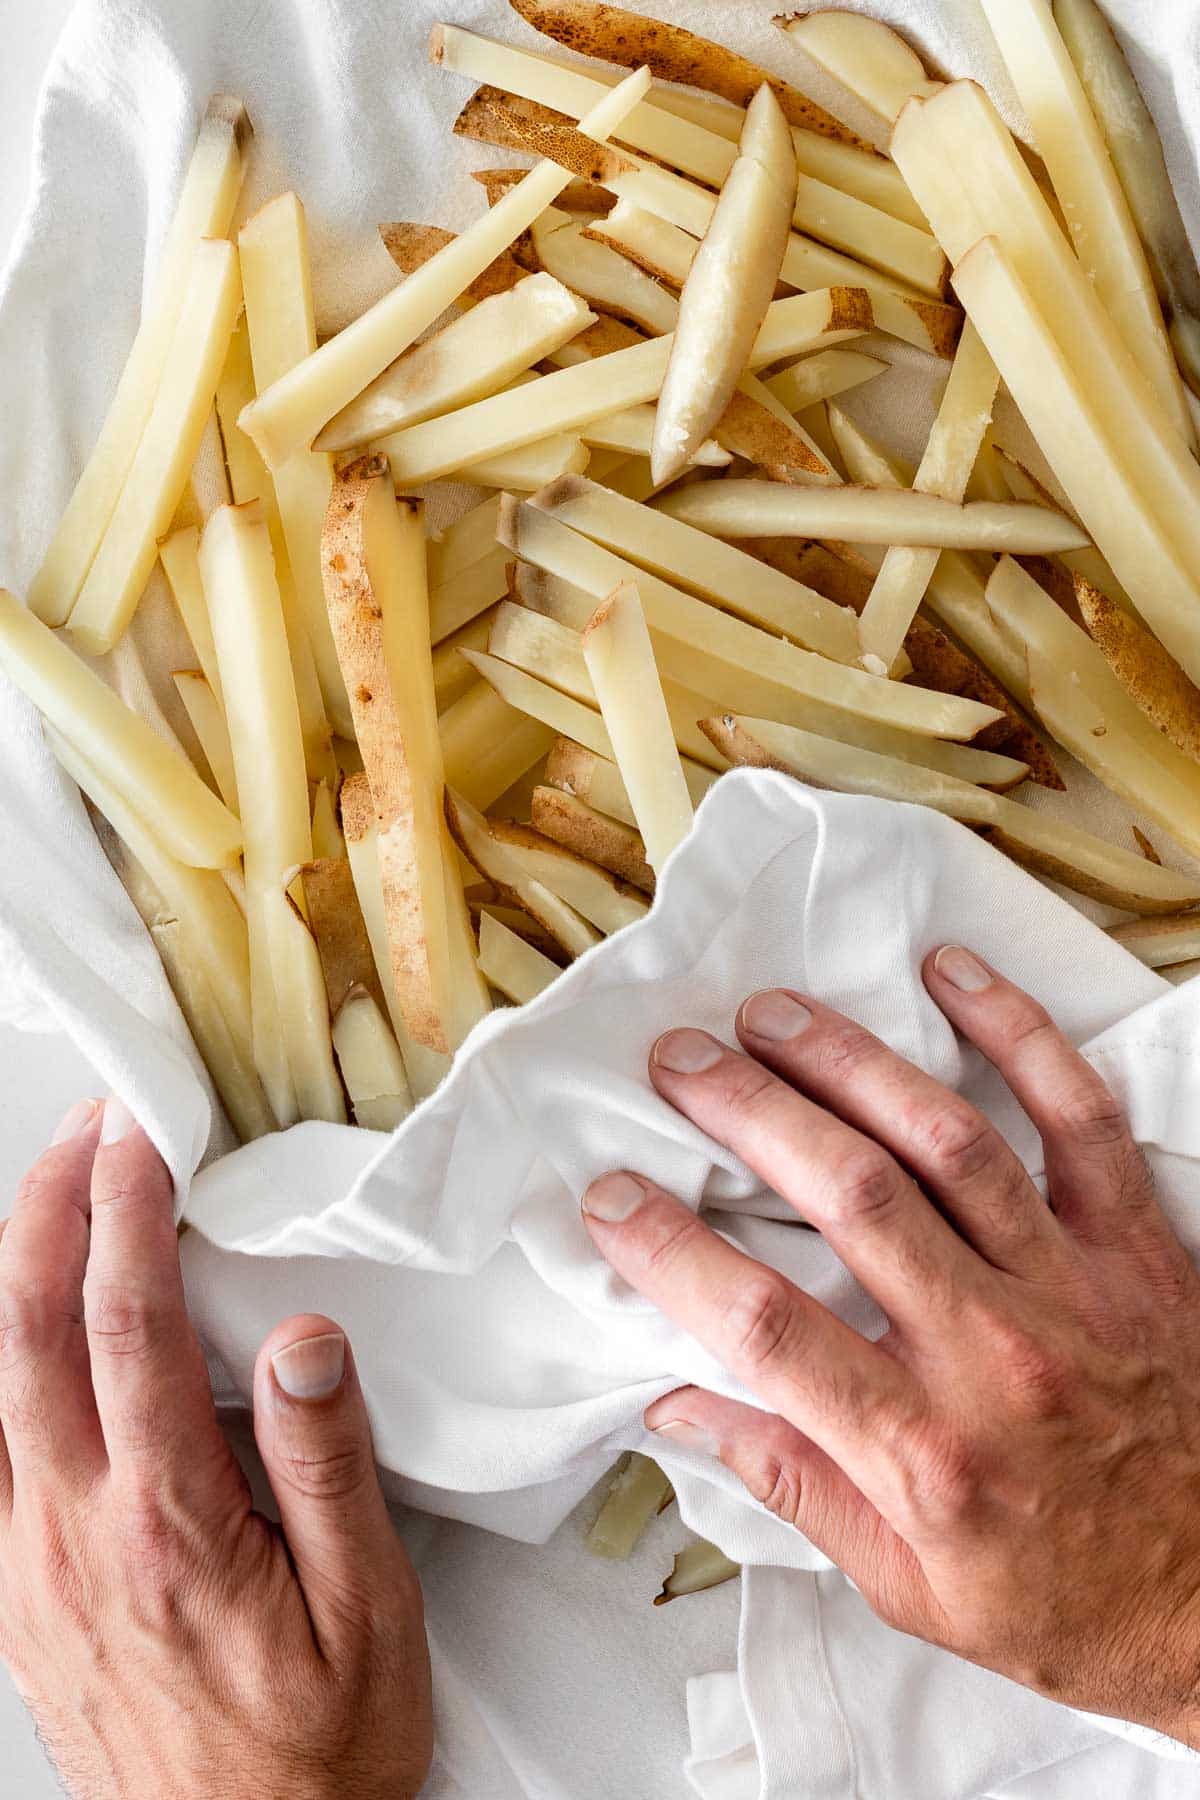 par-boiled french fries being dried in a towel.